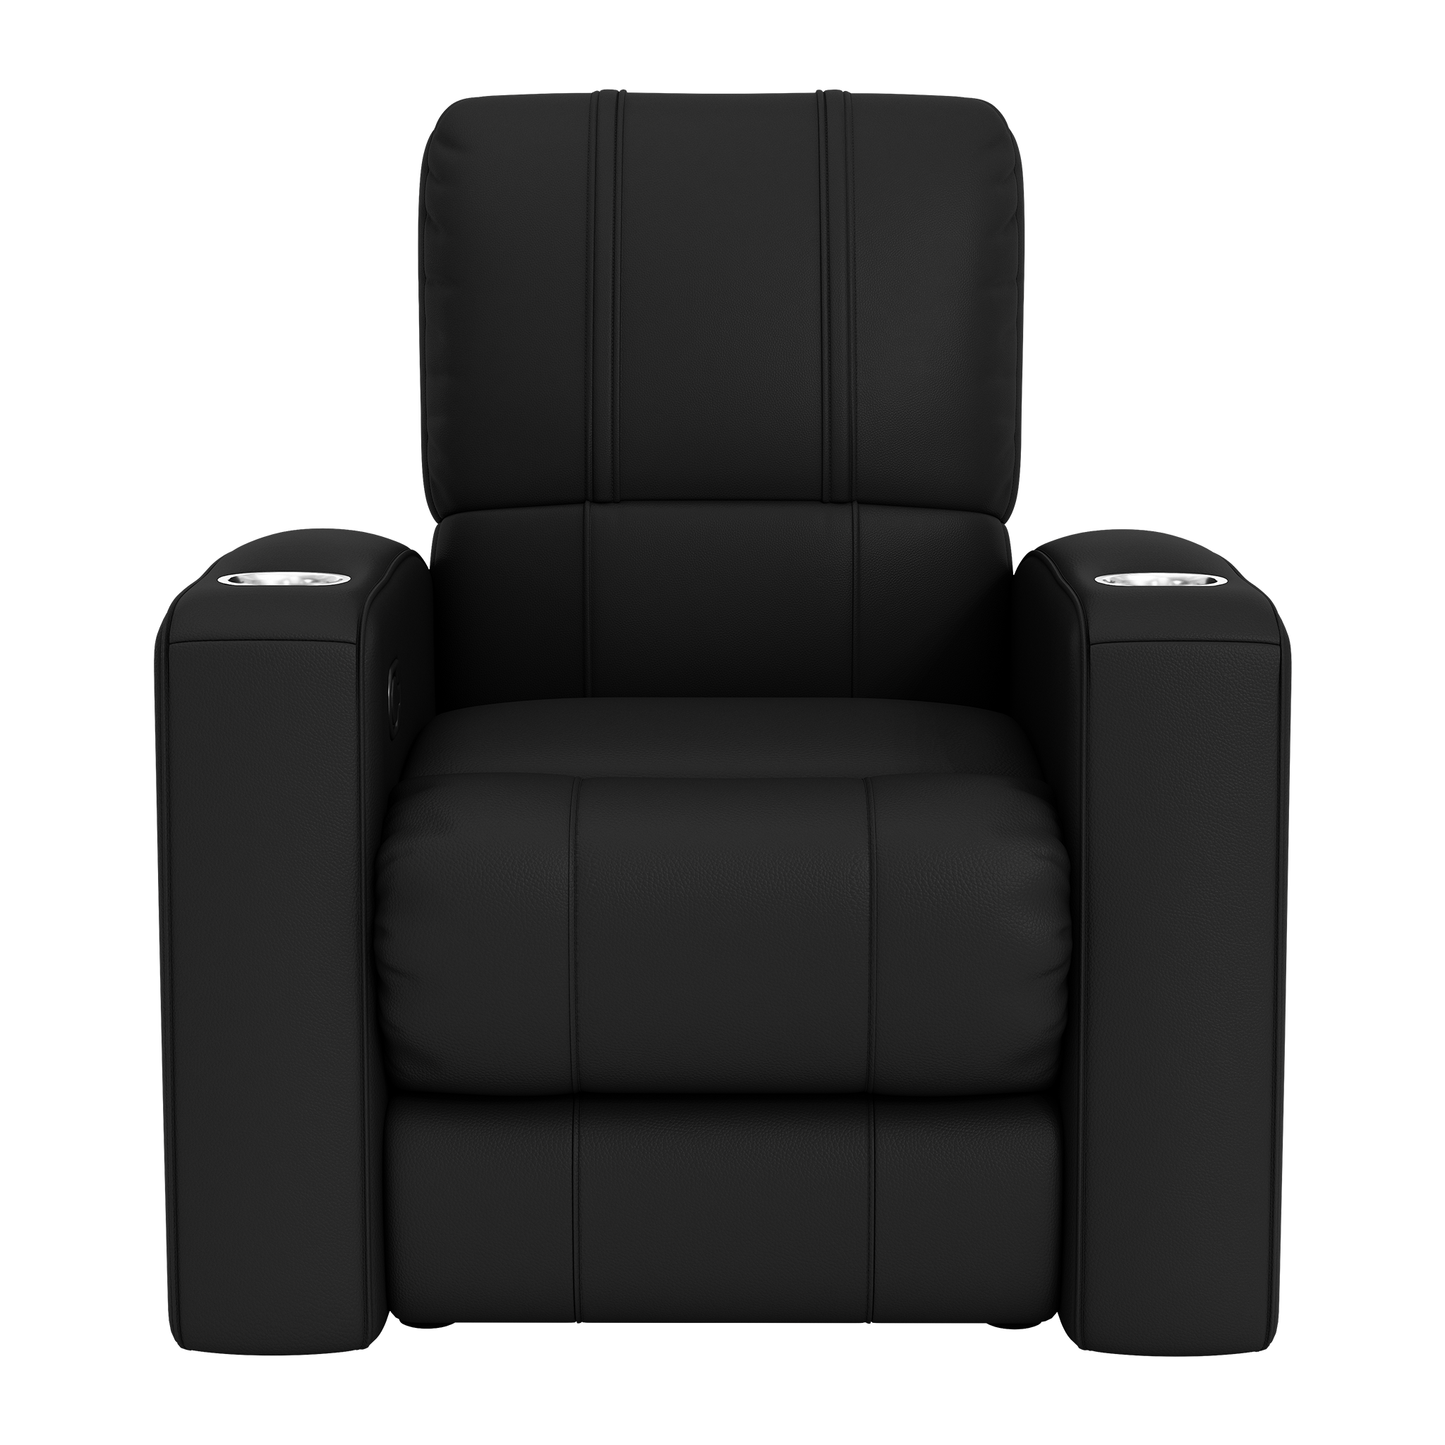 Relax Home Theater Recliner with New Mexico State Aggies Logo